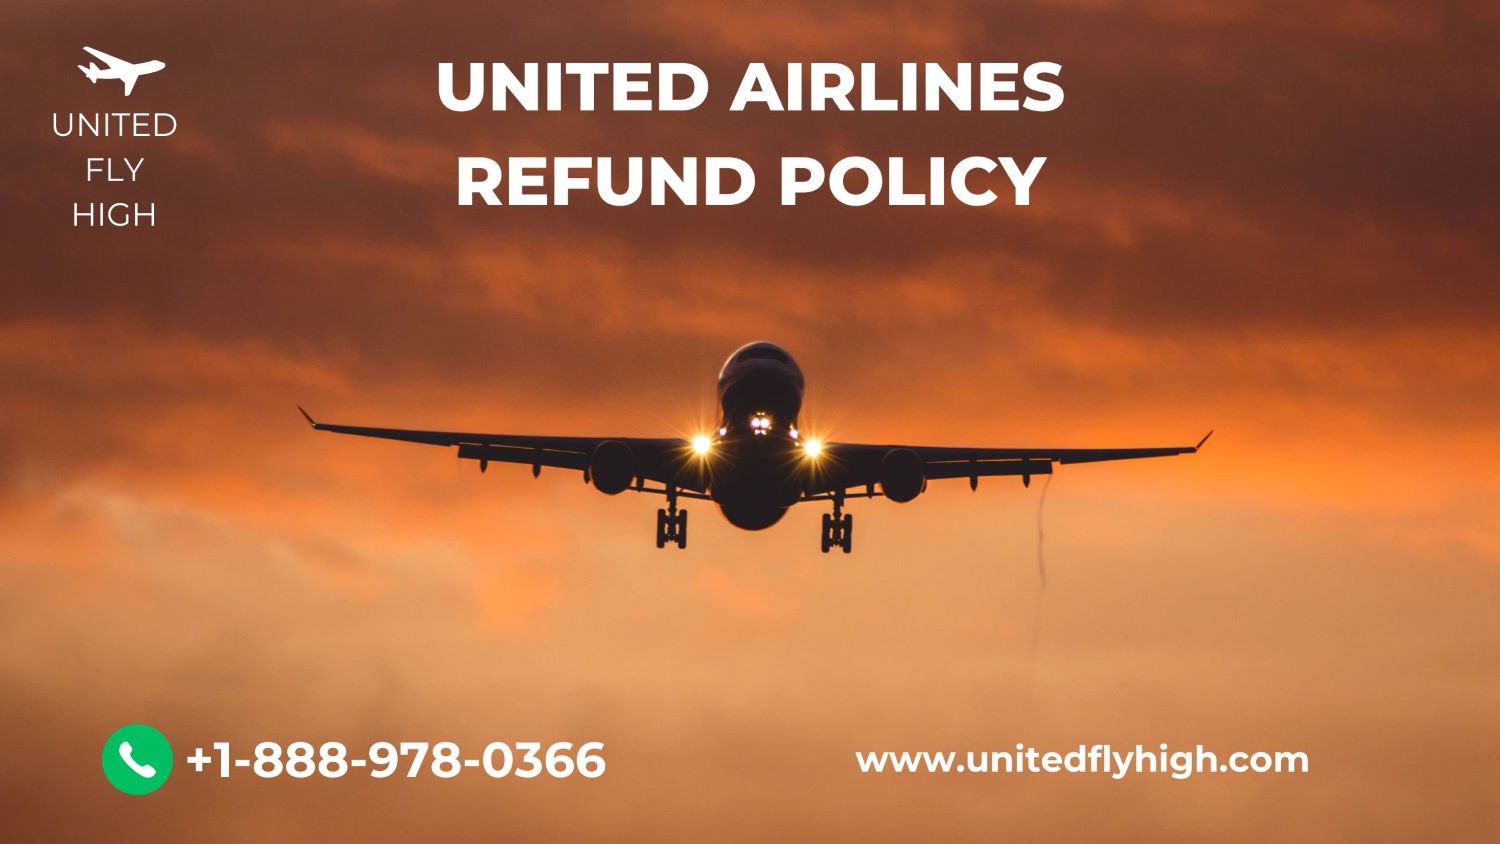 United Airlines refund policy